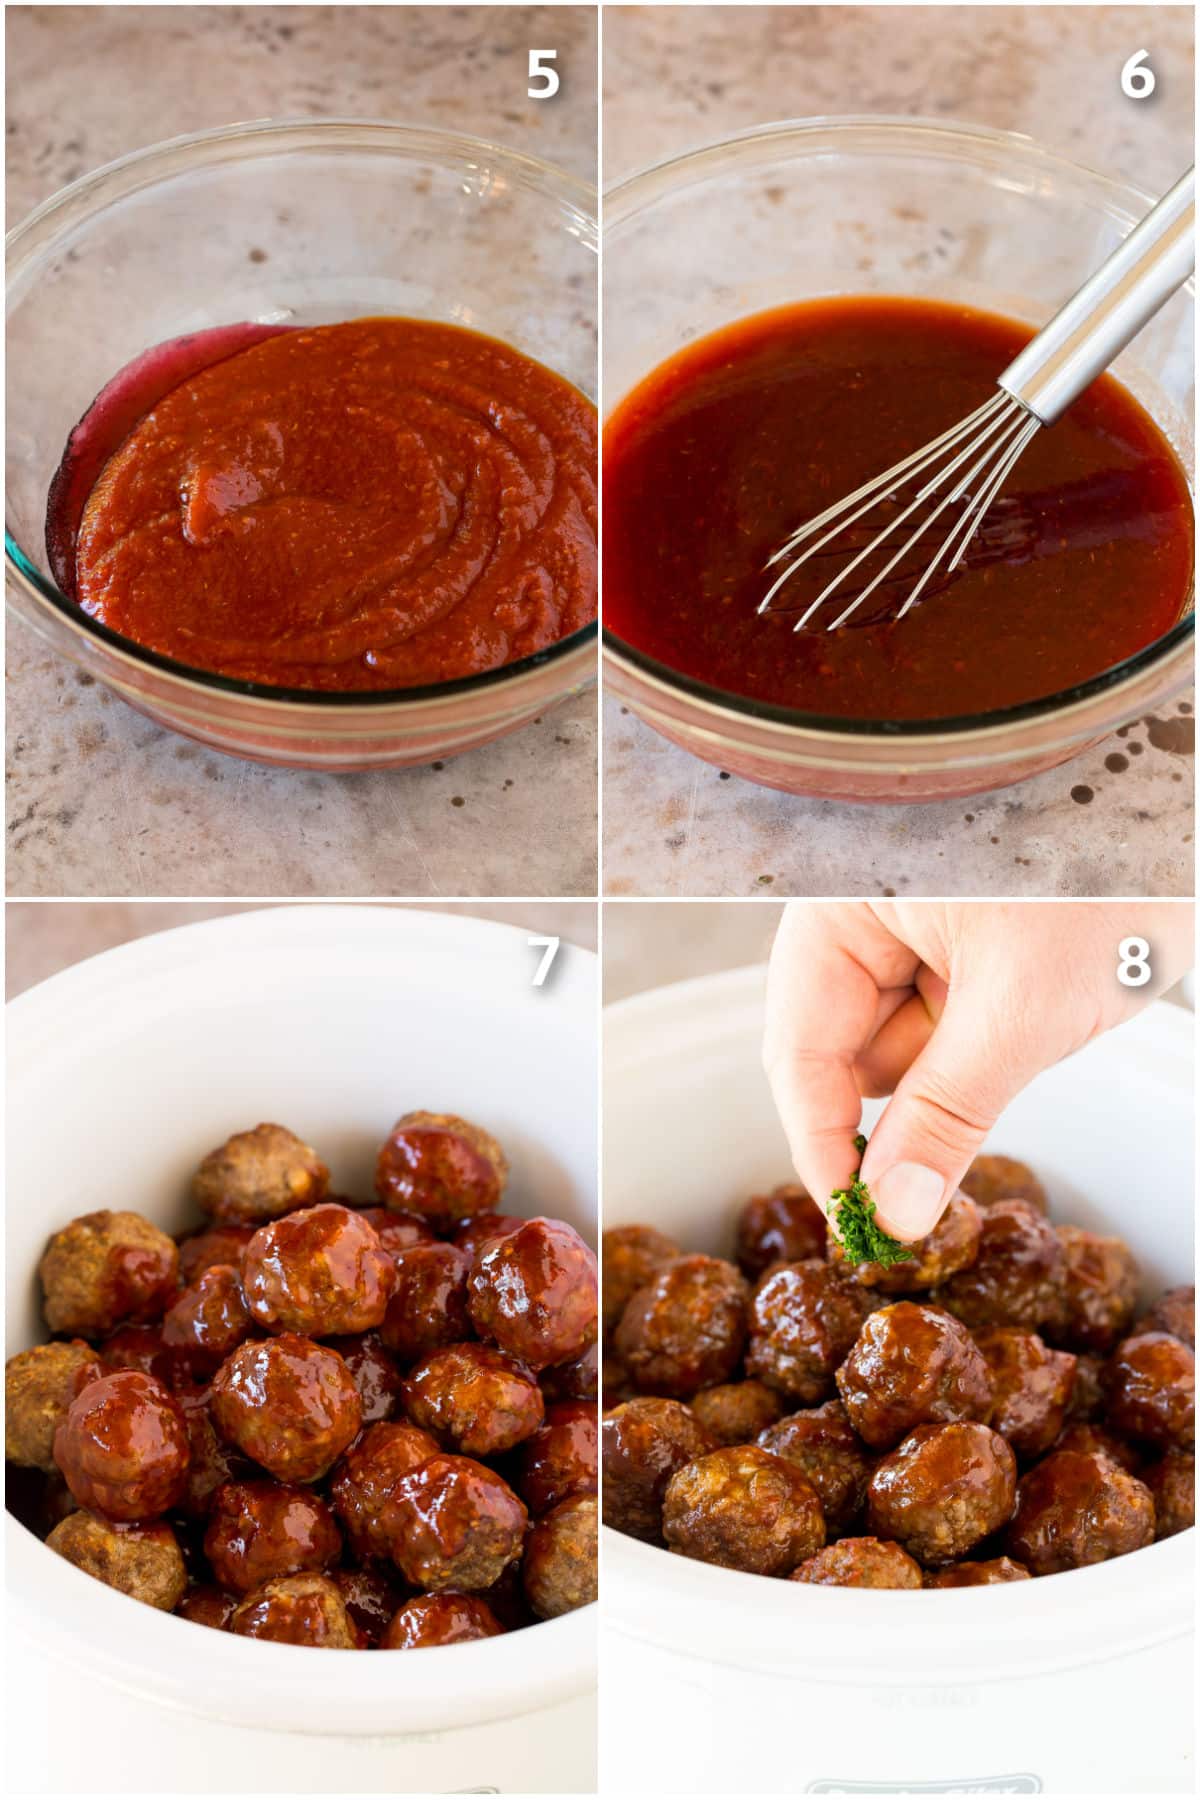 Process shots showing sauce being made and poured over meatballs.